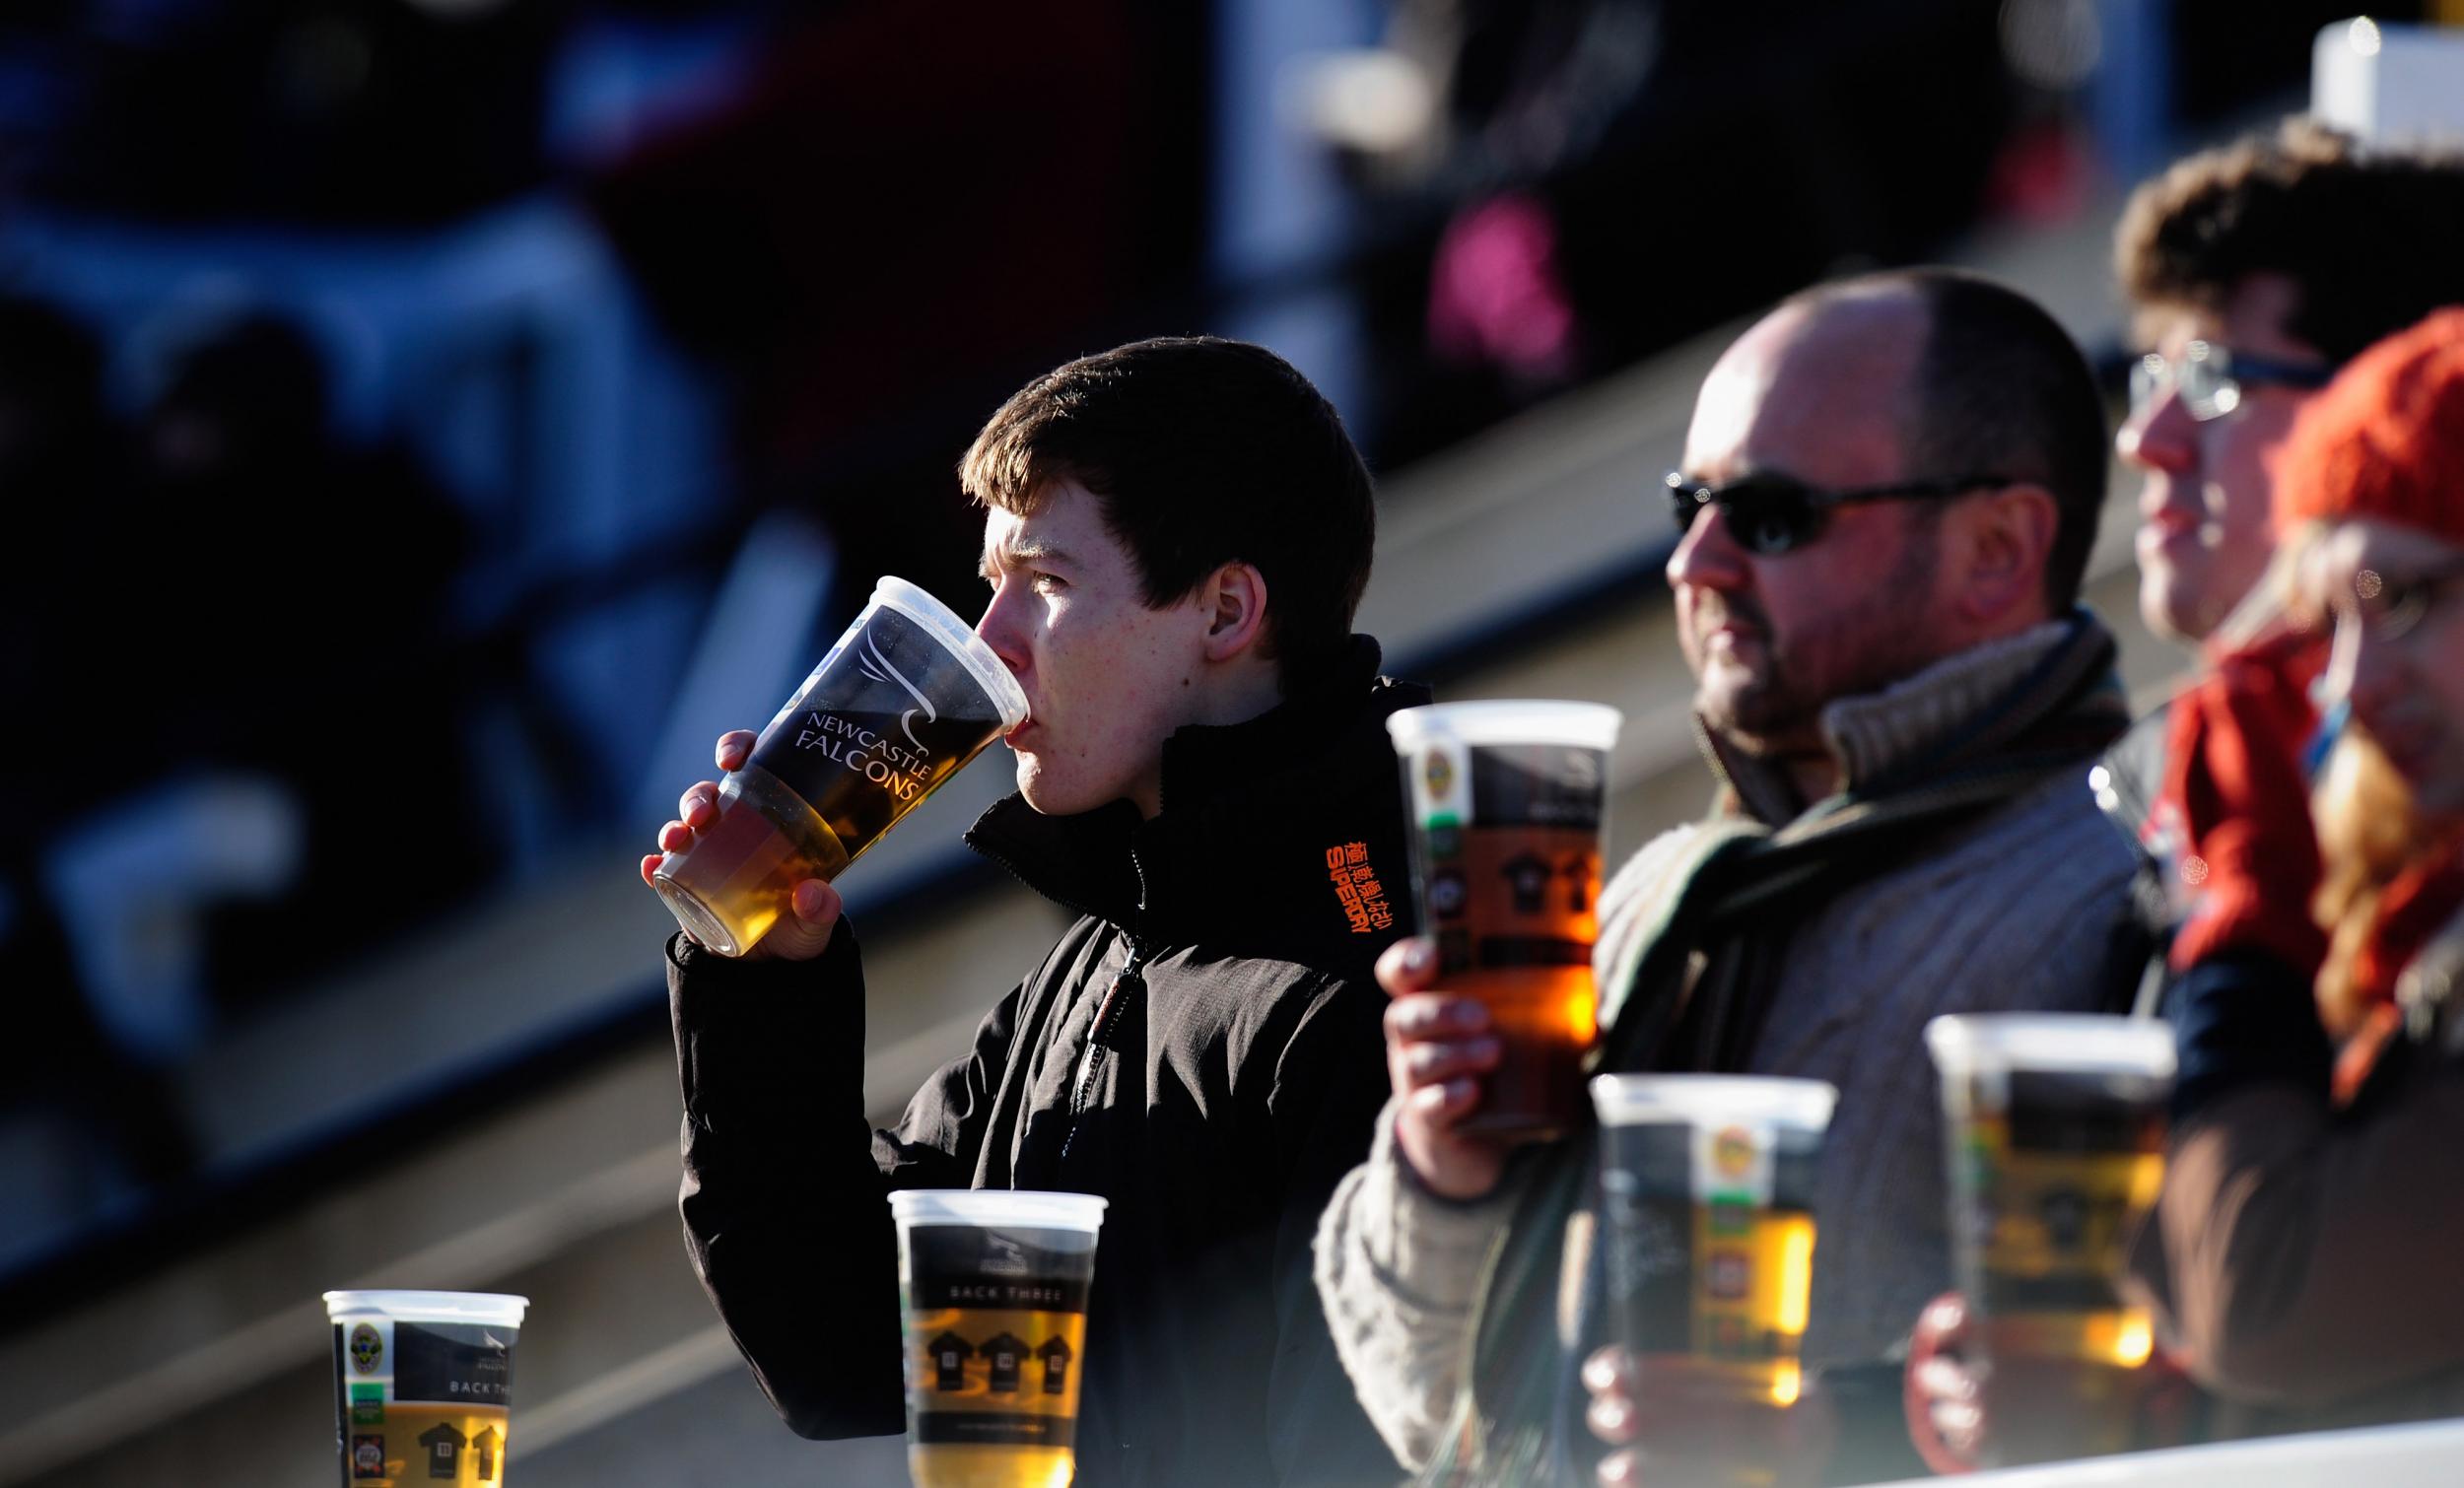 Beer is sold at rugby games all over Britain